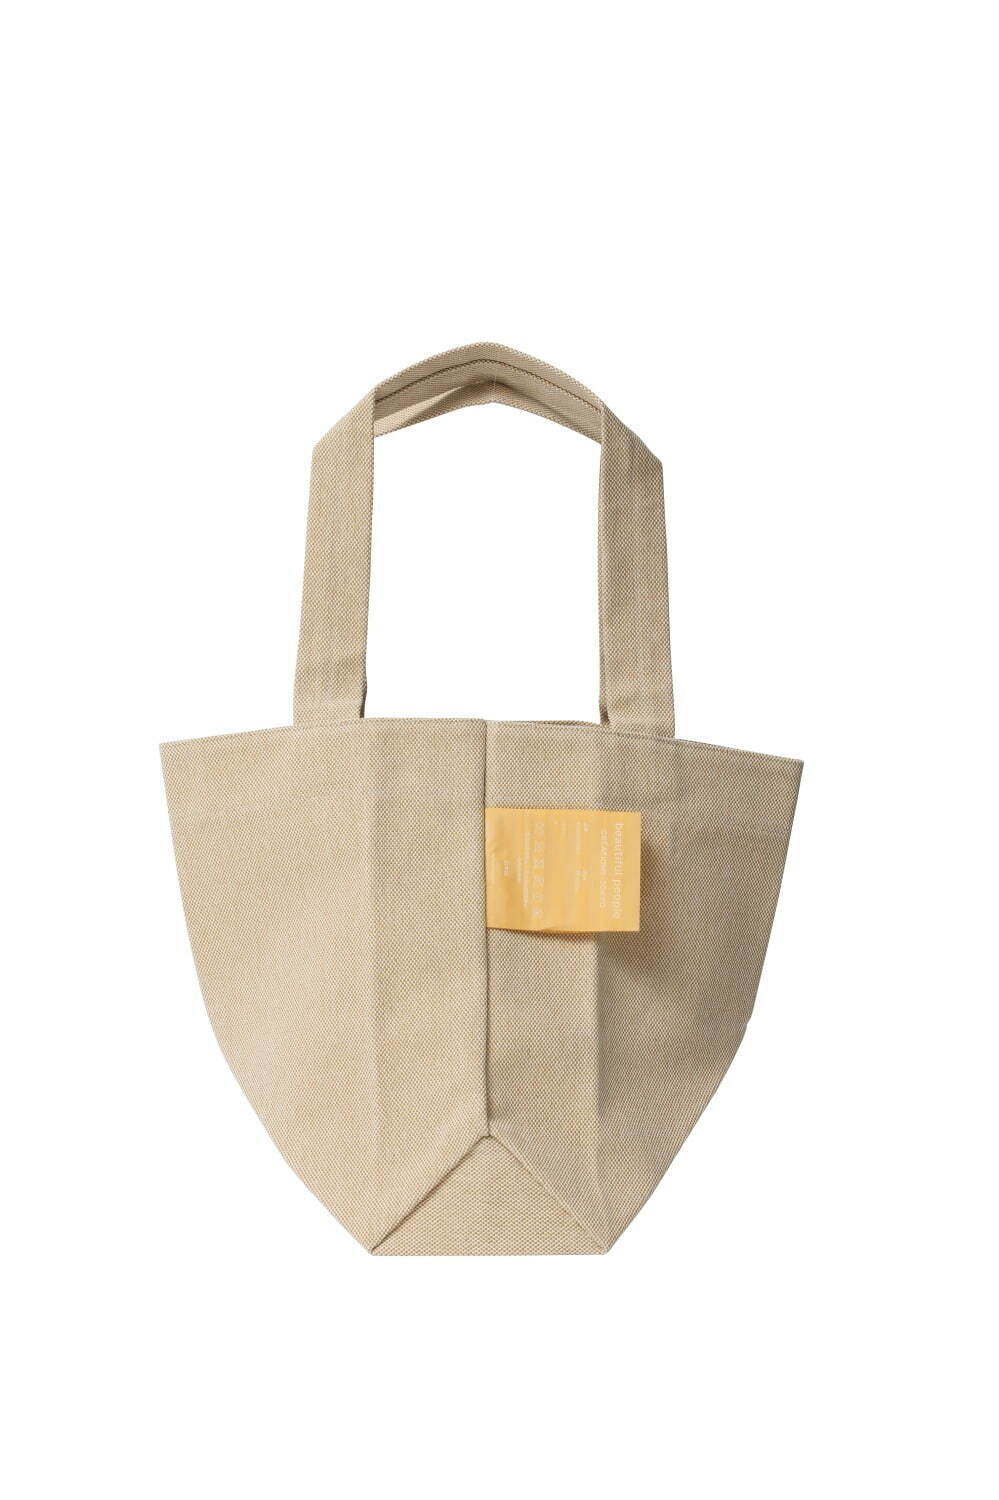 double pressed tote bag 17,600円